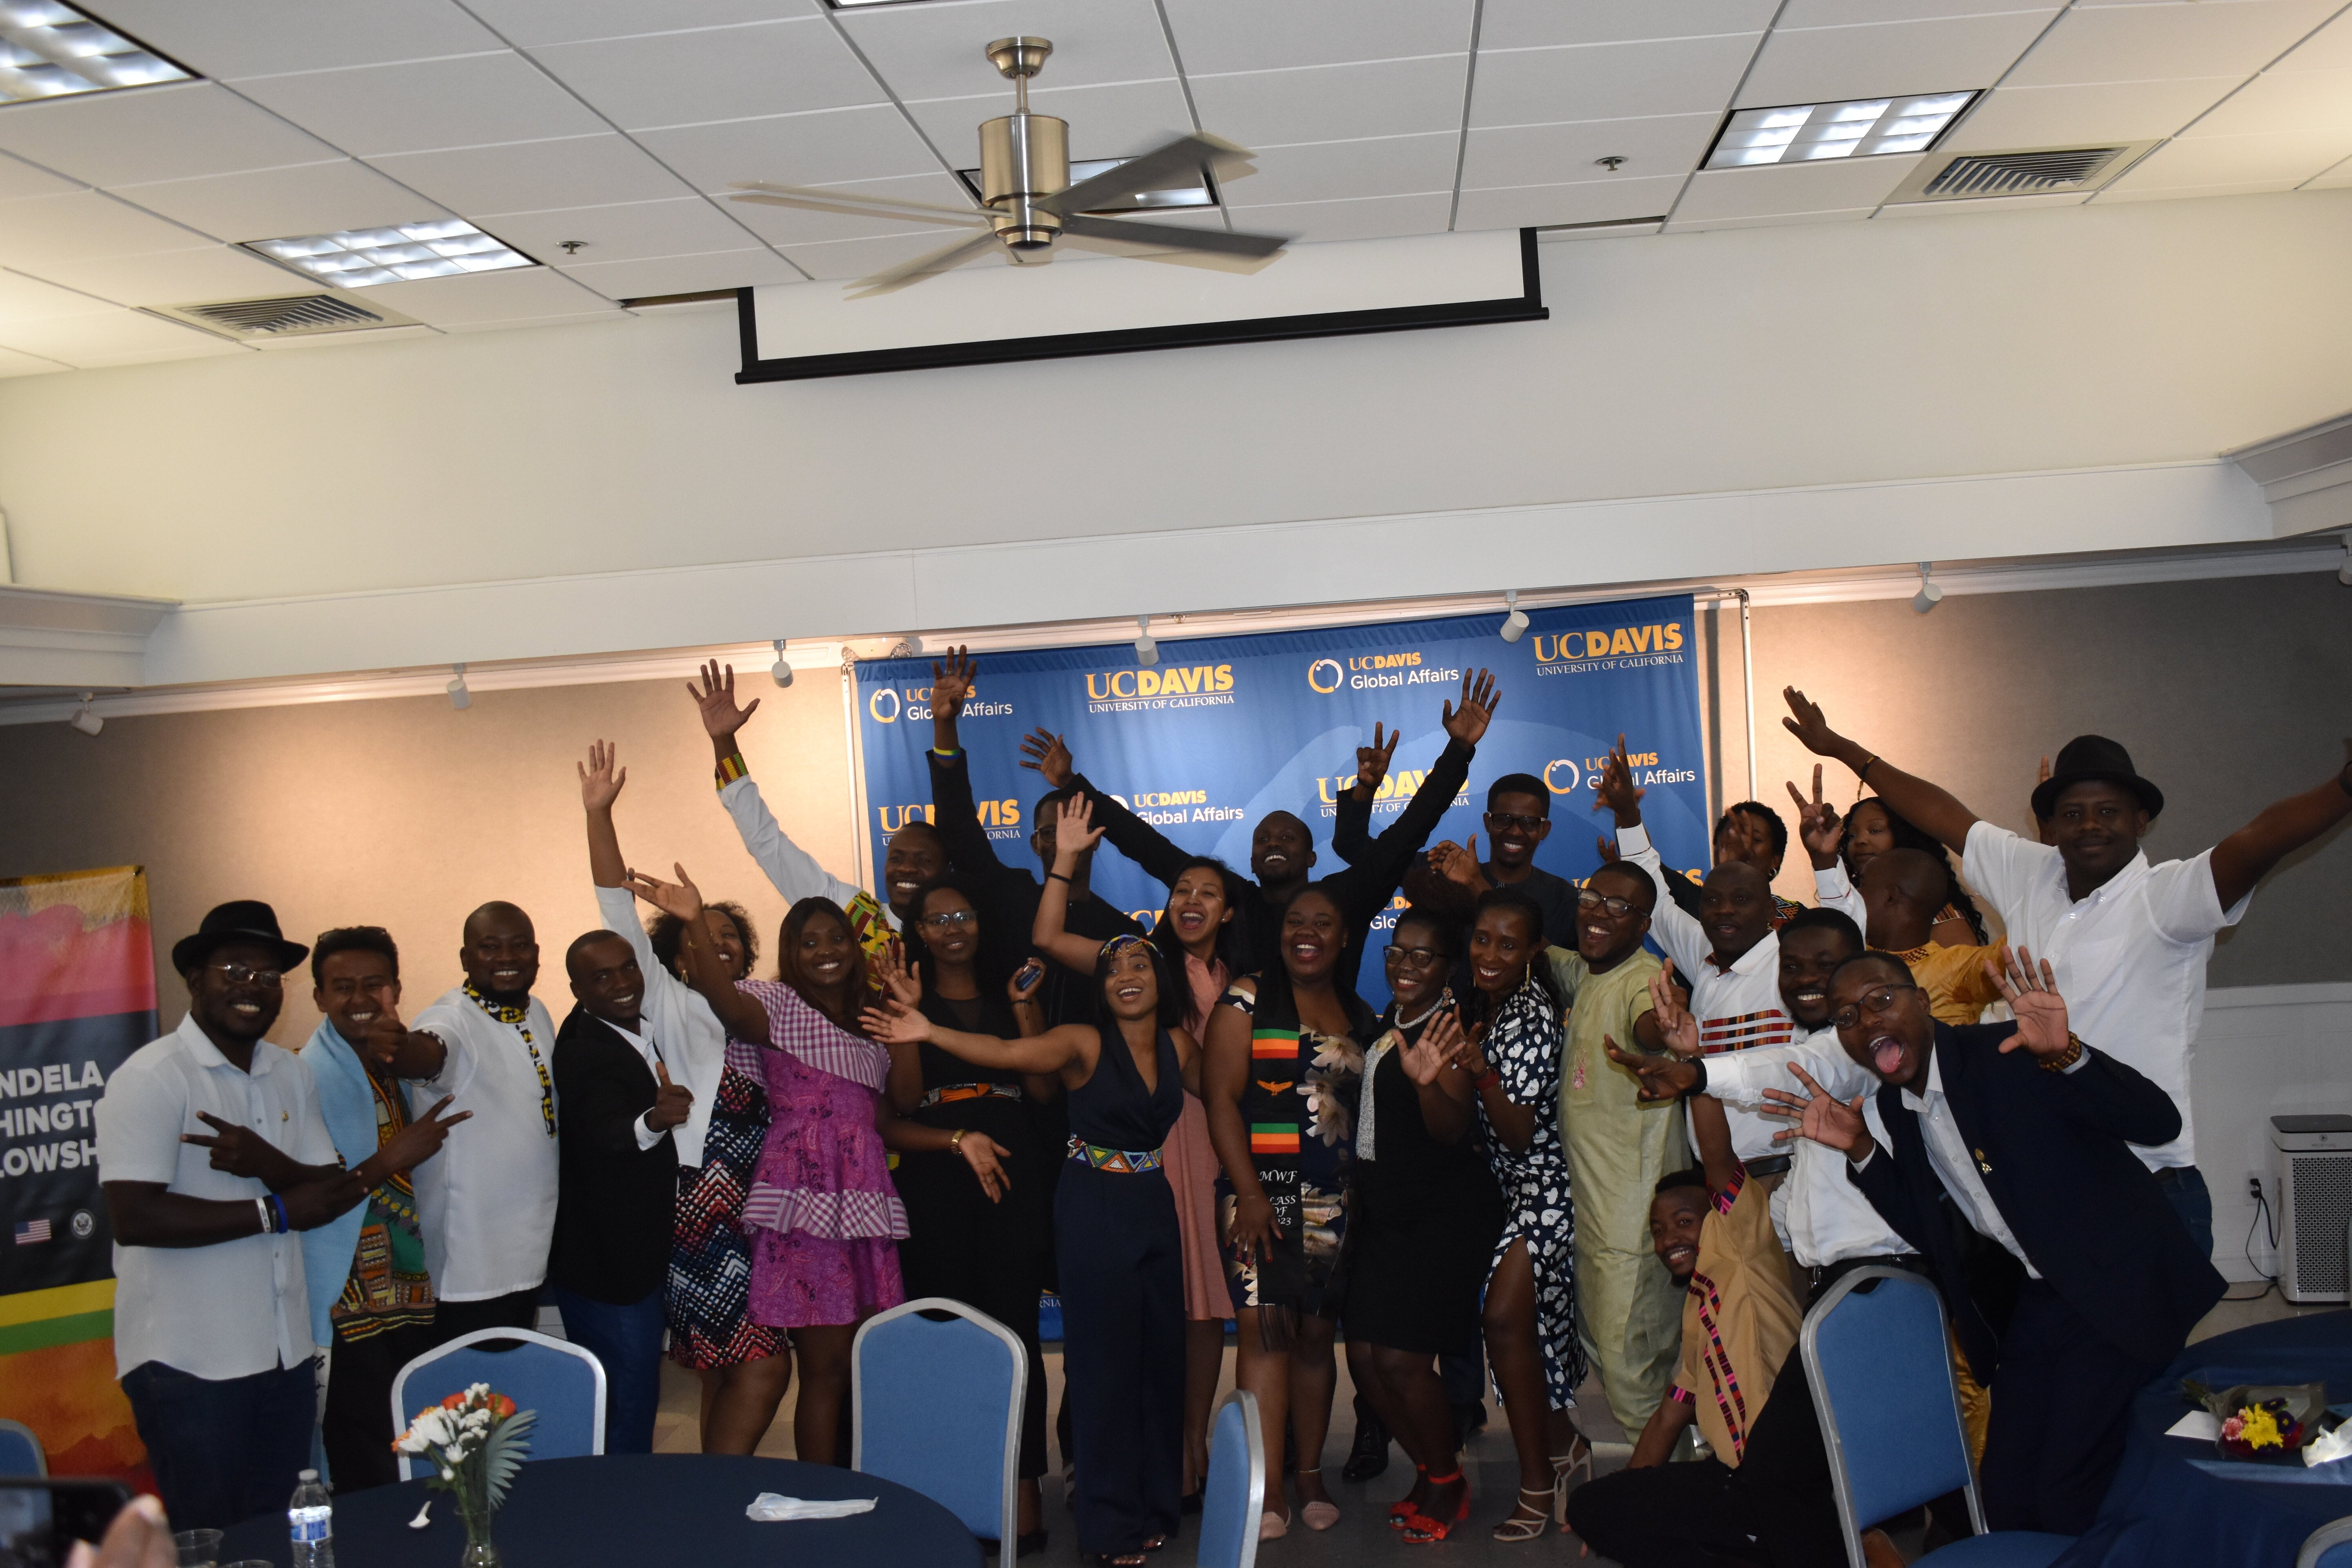 The Mandela Washington Fellows smile in front of a UC Davis Global Affairs backdrop with their arms outstretched.